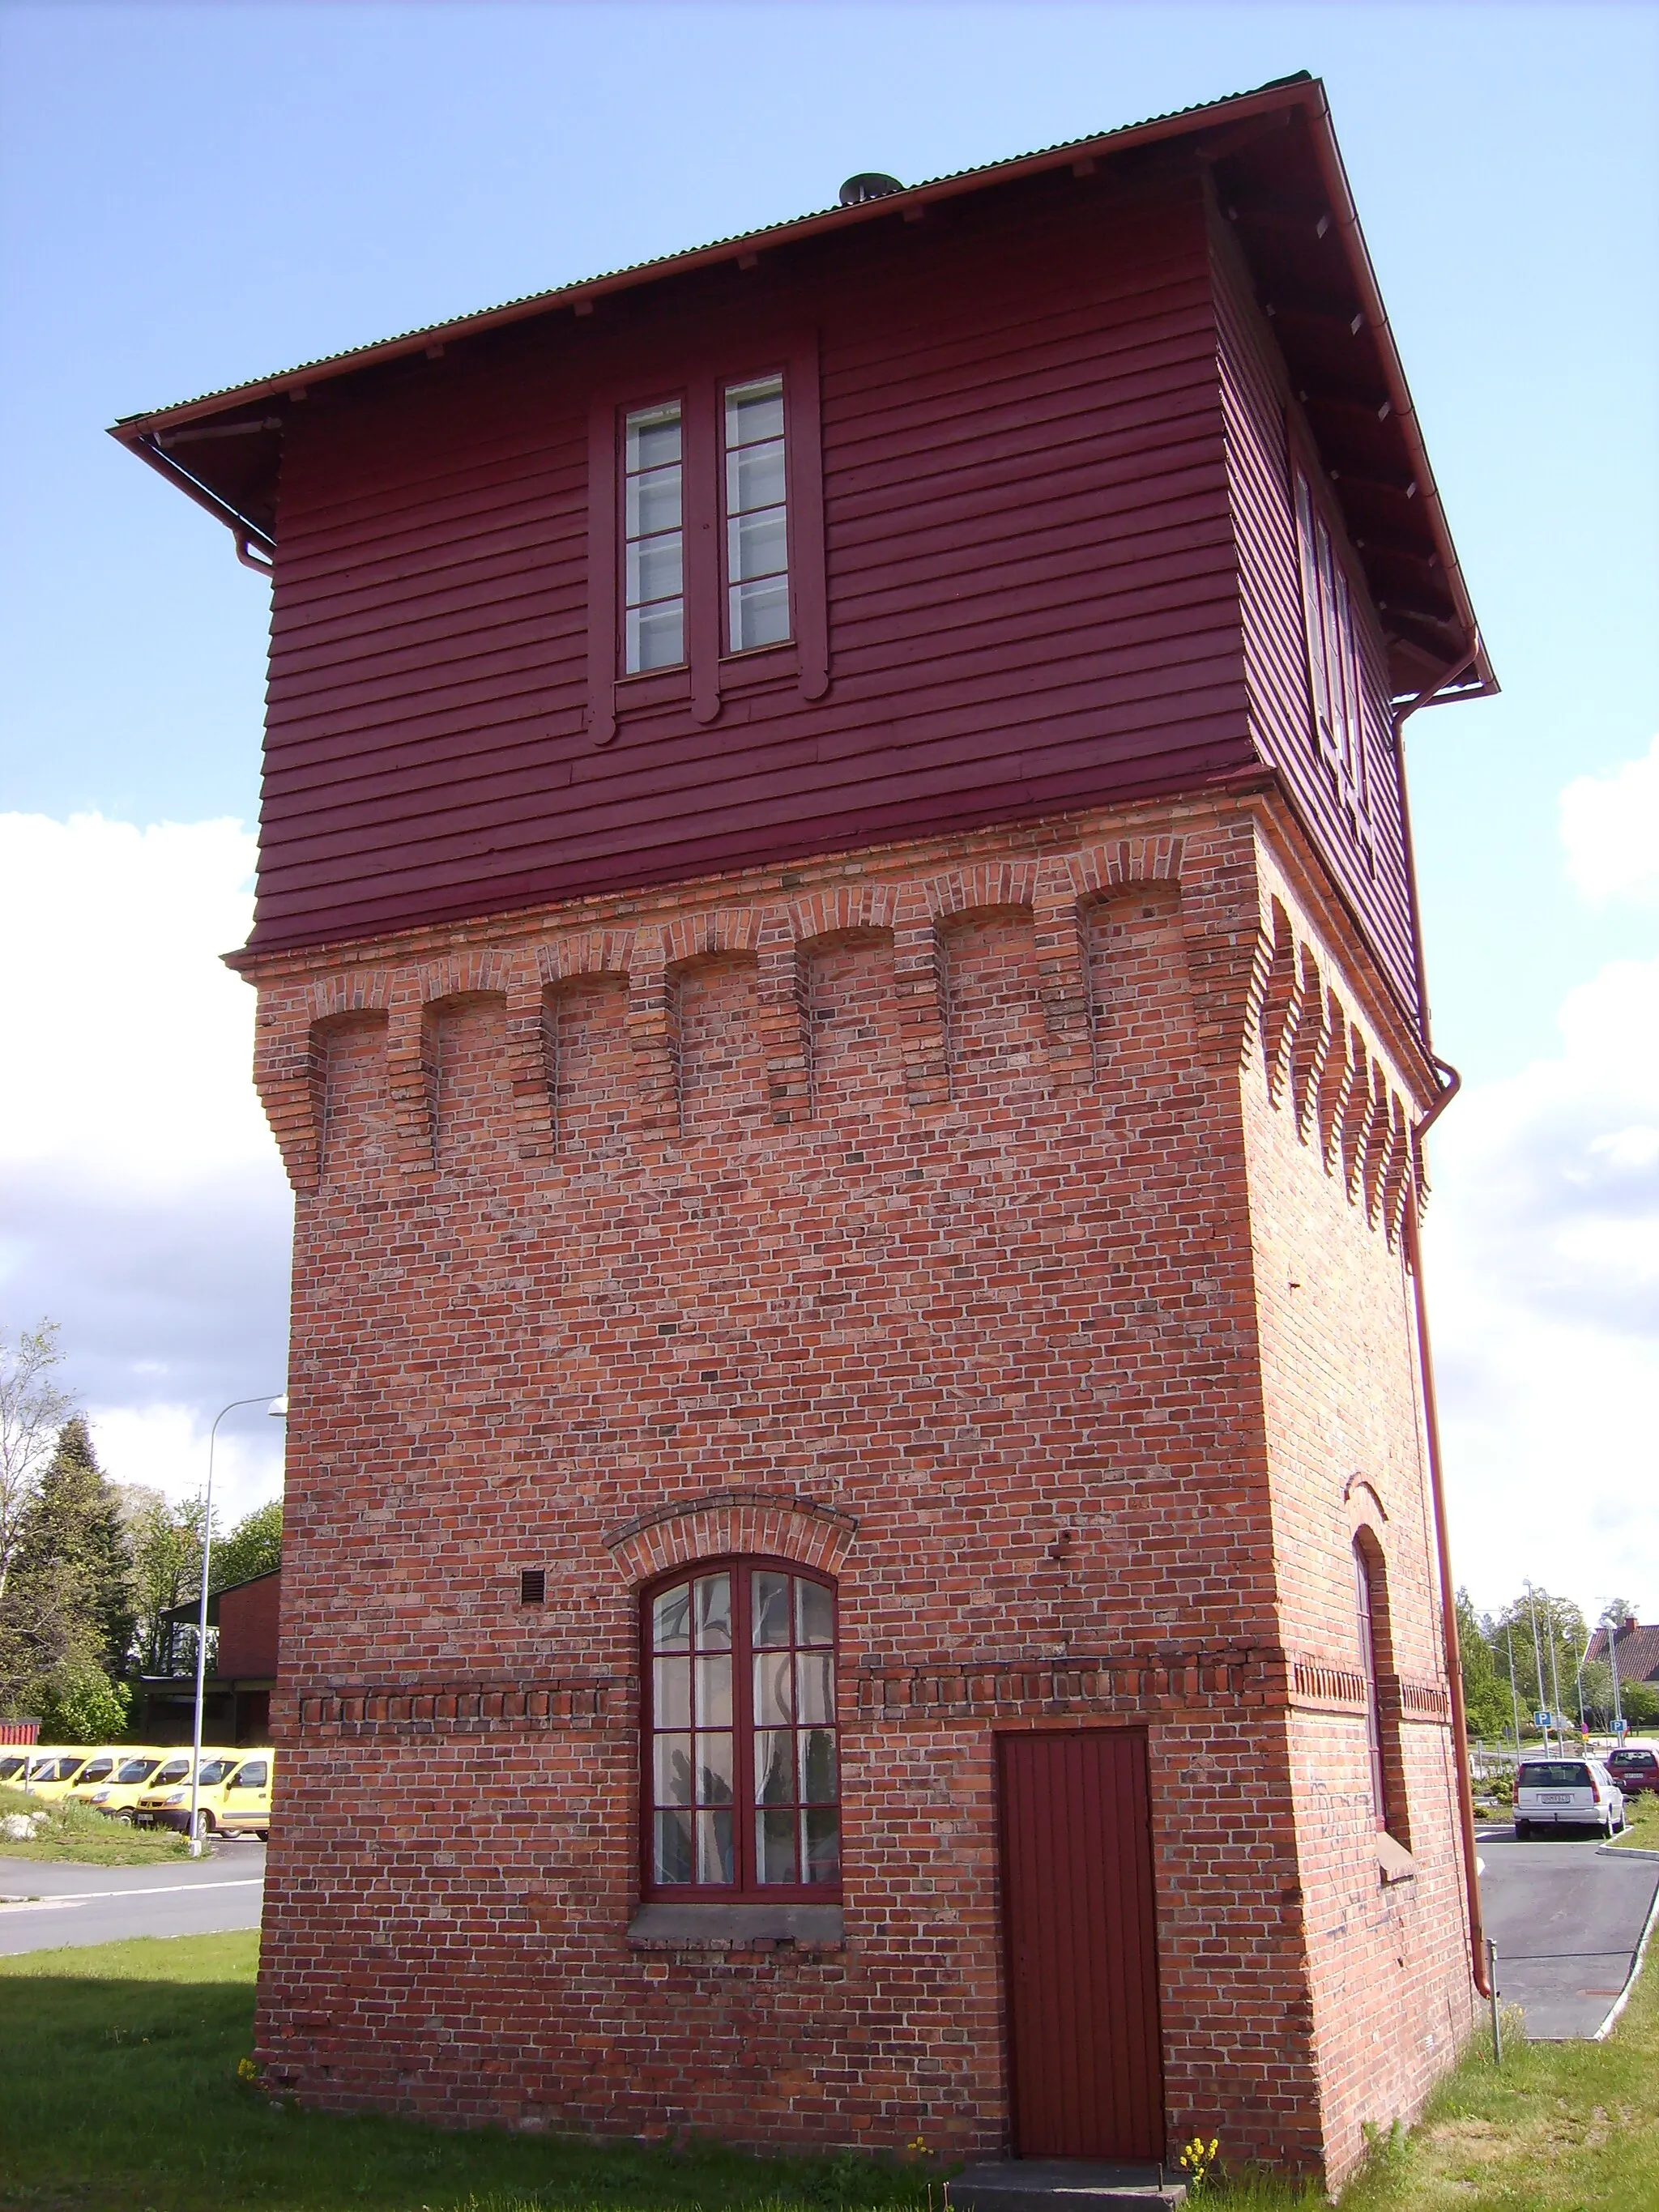 Photo showing: The railway station in the municipality Mullsjö in Sweden.